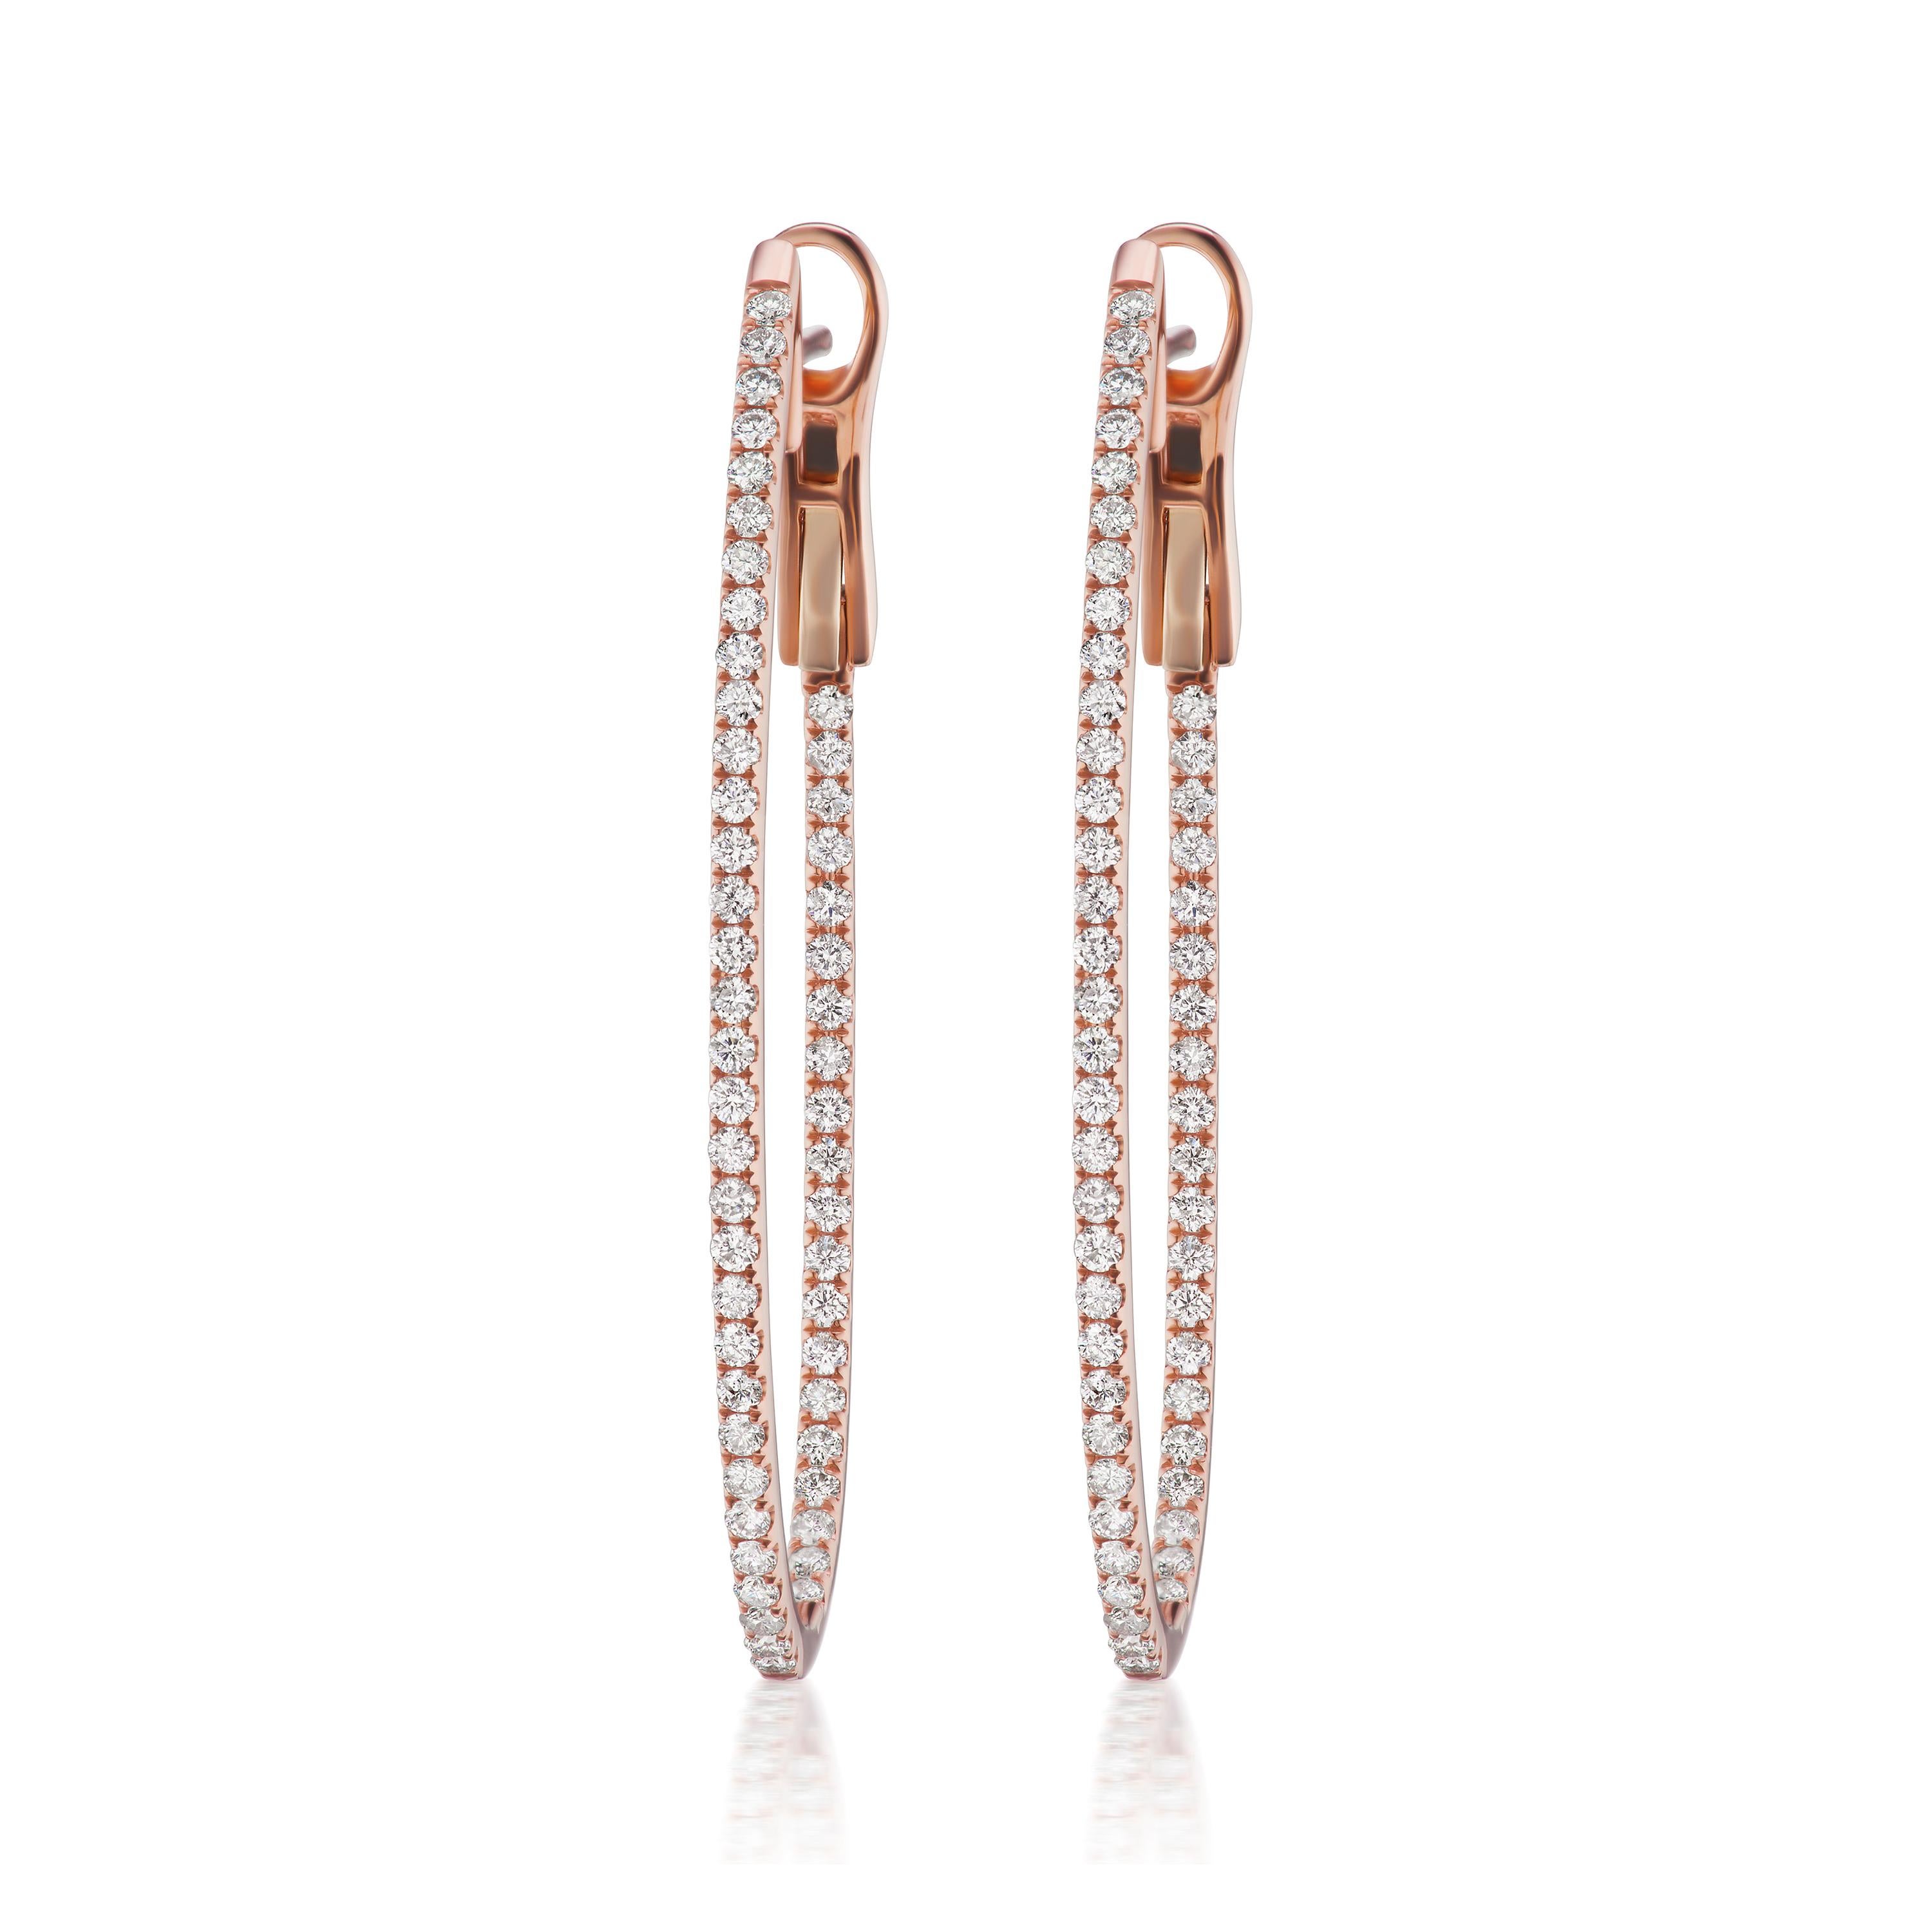 A dazzling pair of rose gold hoops is featured by Luxle with 104 pave round diamonds embellished inside and outside, totaling 1.05 carats are framed within pave set, this hoops come with omega back.

Please follow the Luxury Jewels storefront to